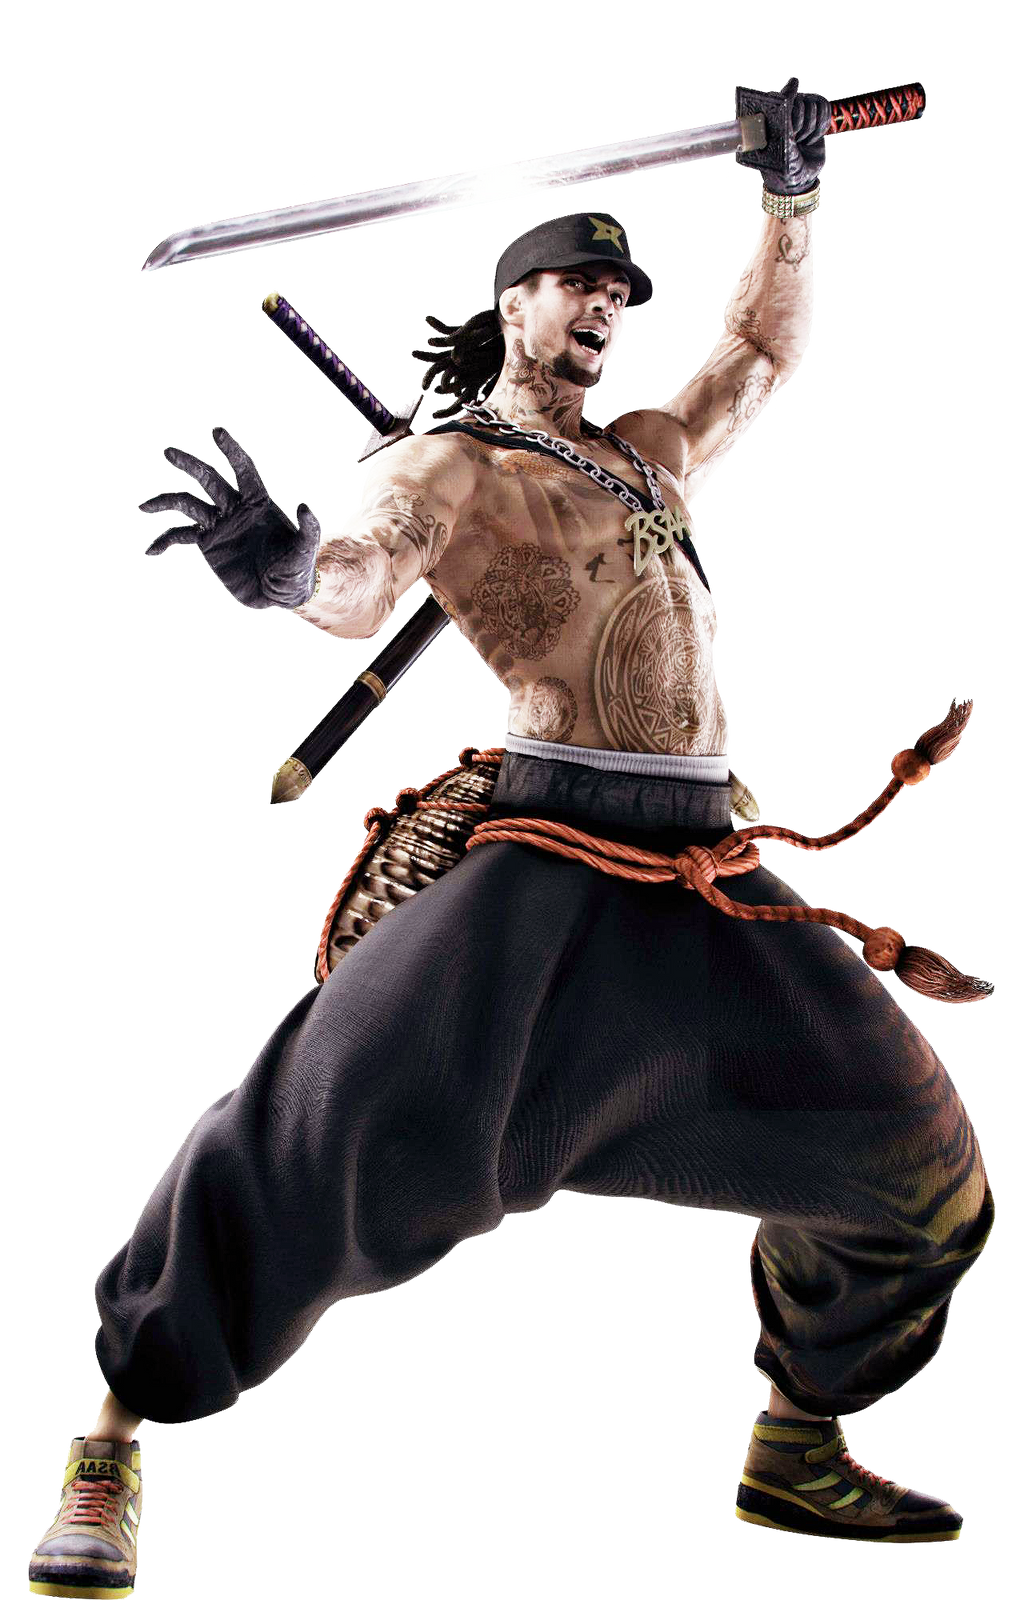 keith_lumley_samurai_render_by_thanhthao90-d65bsow.png